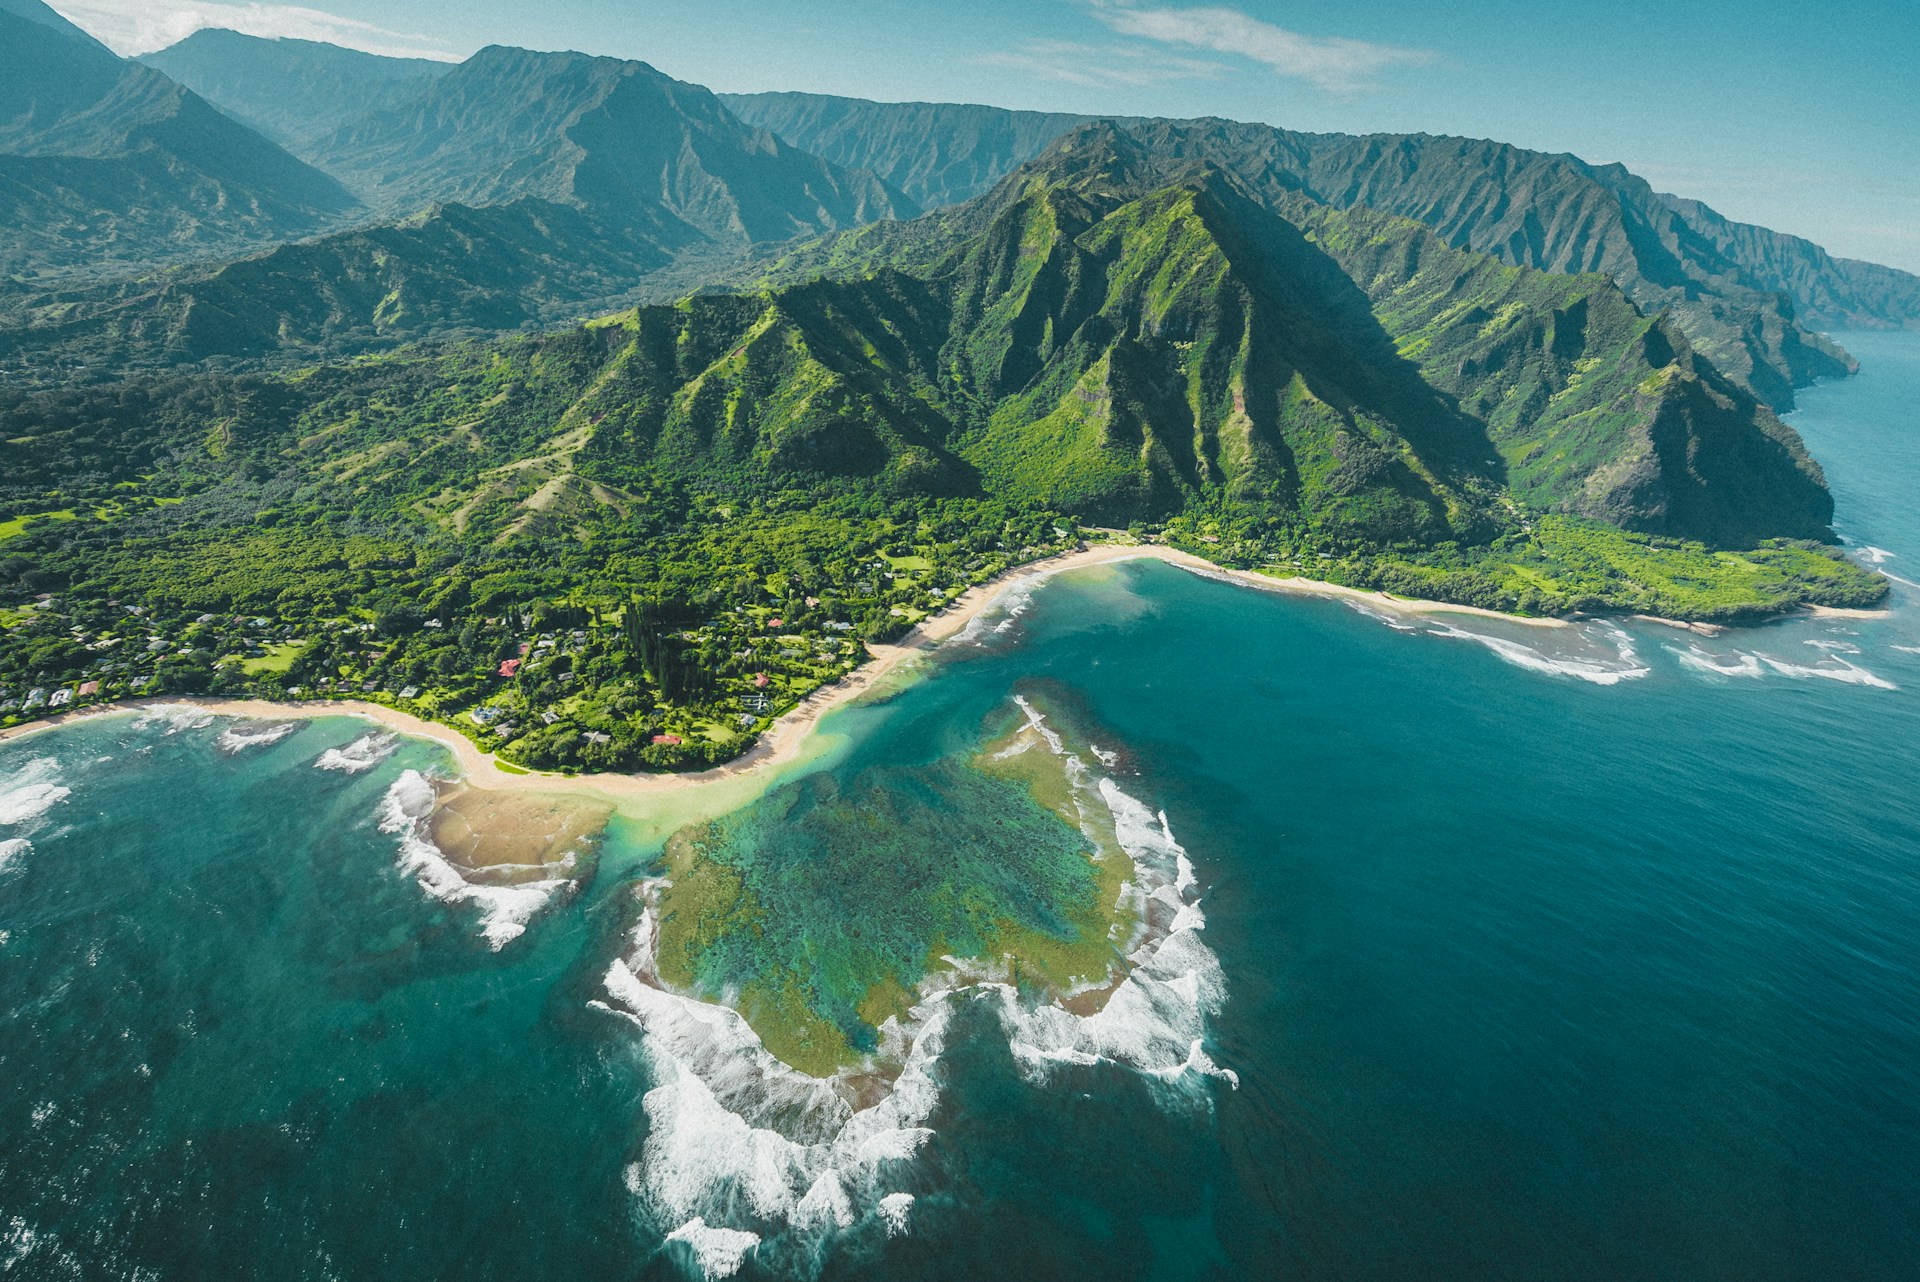 Hawaii’s regulator announced the official end of the Digital Currency Innovation Lab (DCIL) on June 30. The DCIL concluded that crypto firms no longer needed a Money Transmitter License (MTL) to operate in the state. Related Reading: Coinbase CLO Accuses SEC Of Continued Stonewalling, As Legal Battle Intensifies Hawaii Crypto Firms No Longer Need MTL